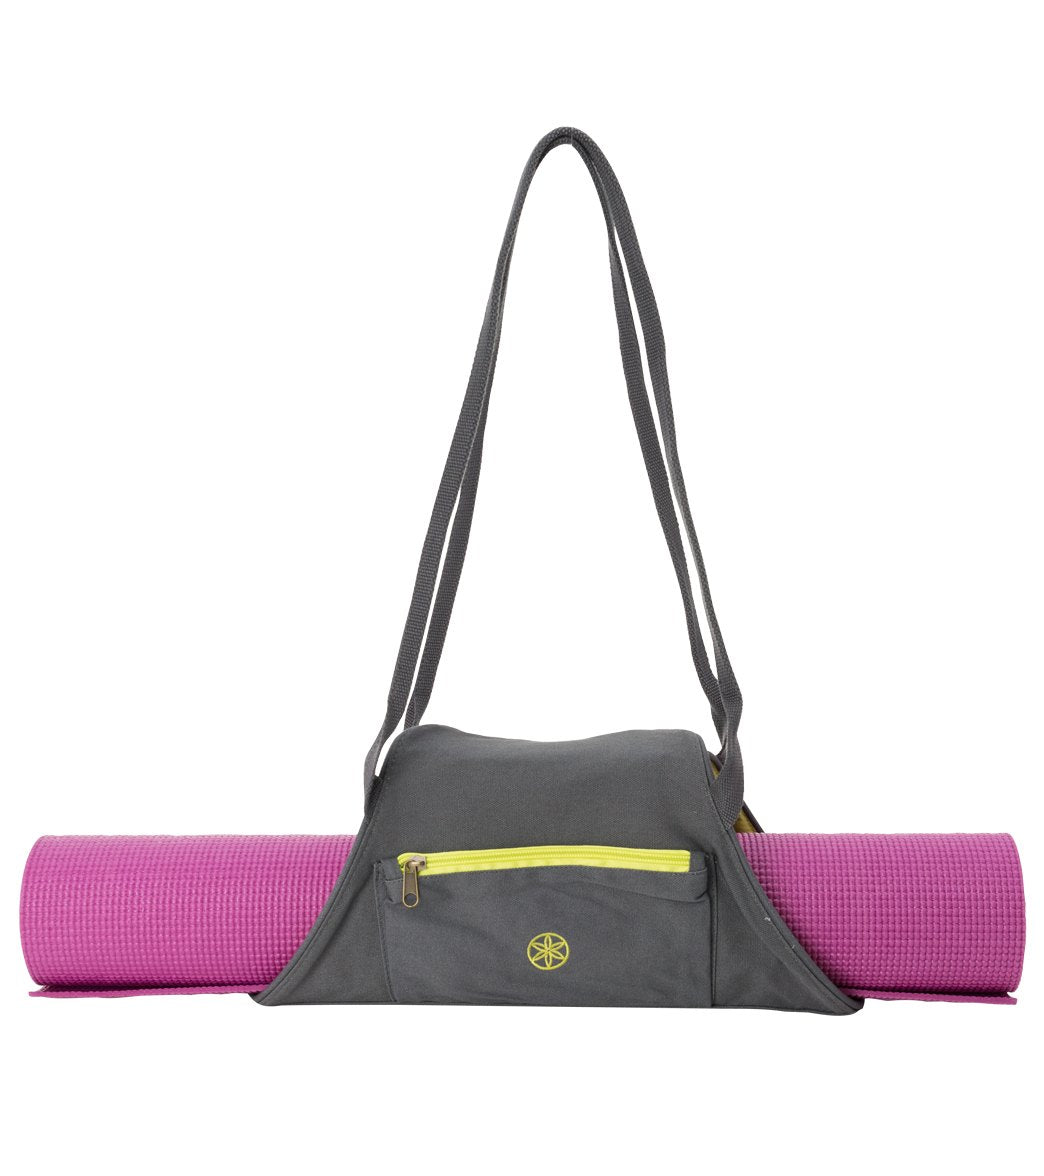 gaiam on the go yoga mat carrier